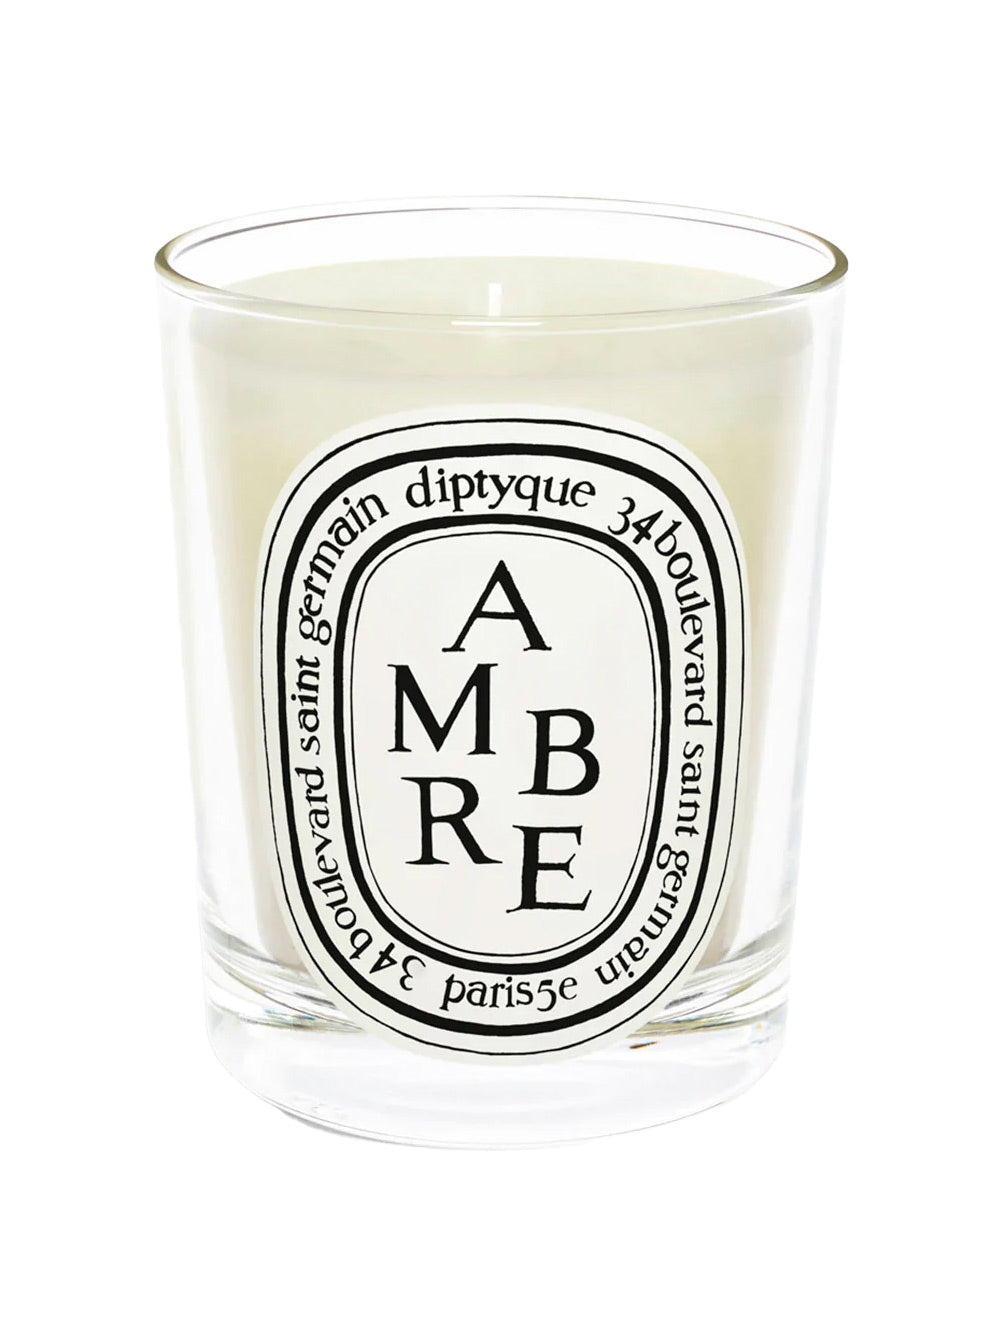 Ambre candle 190g